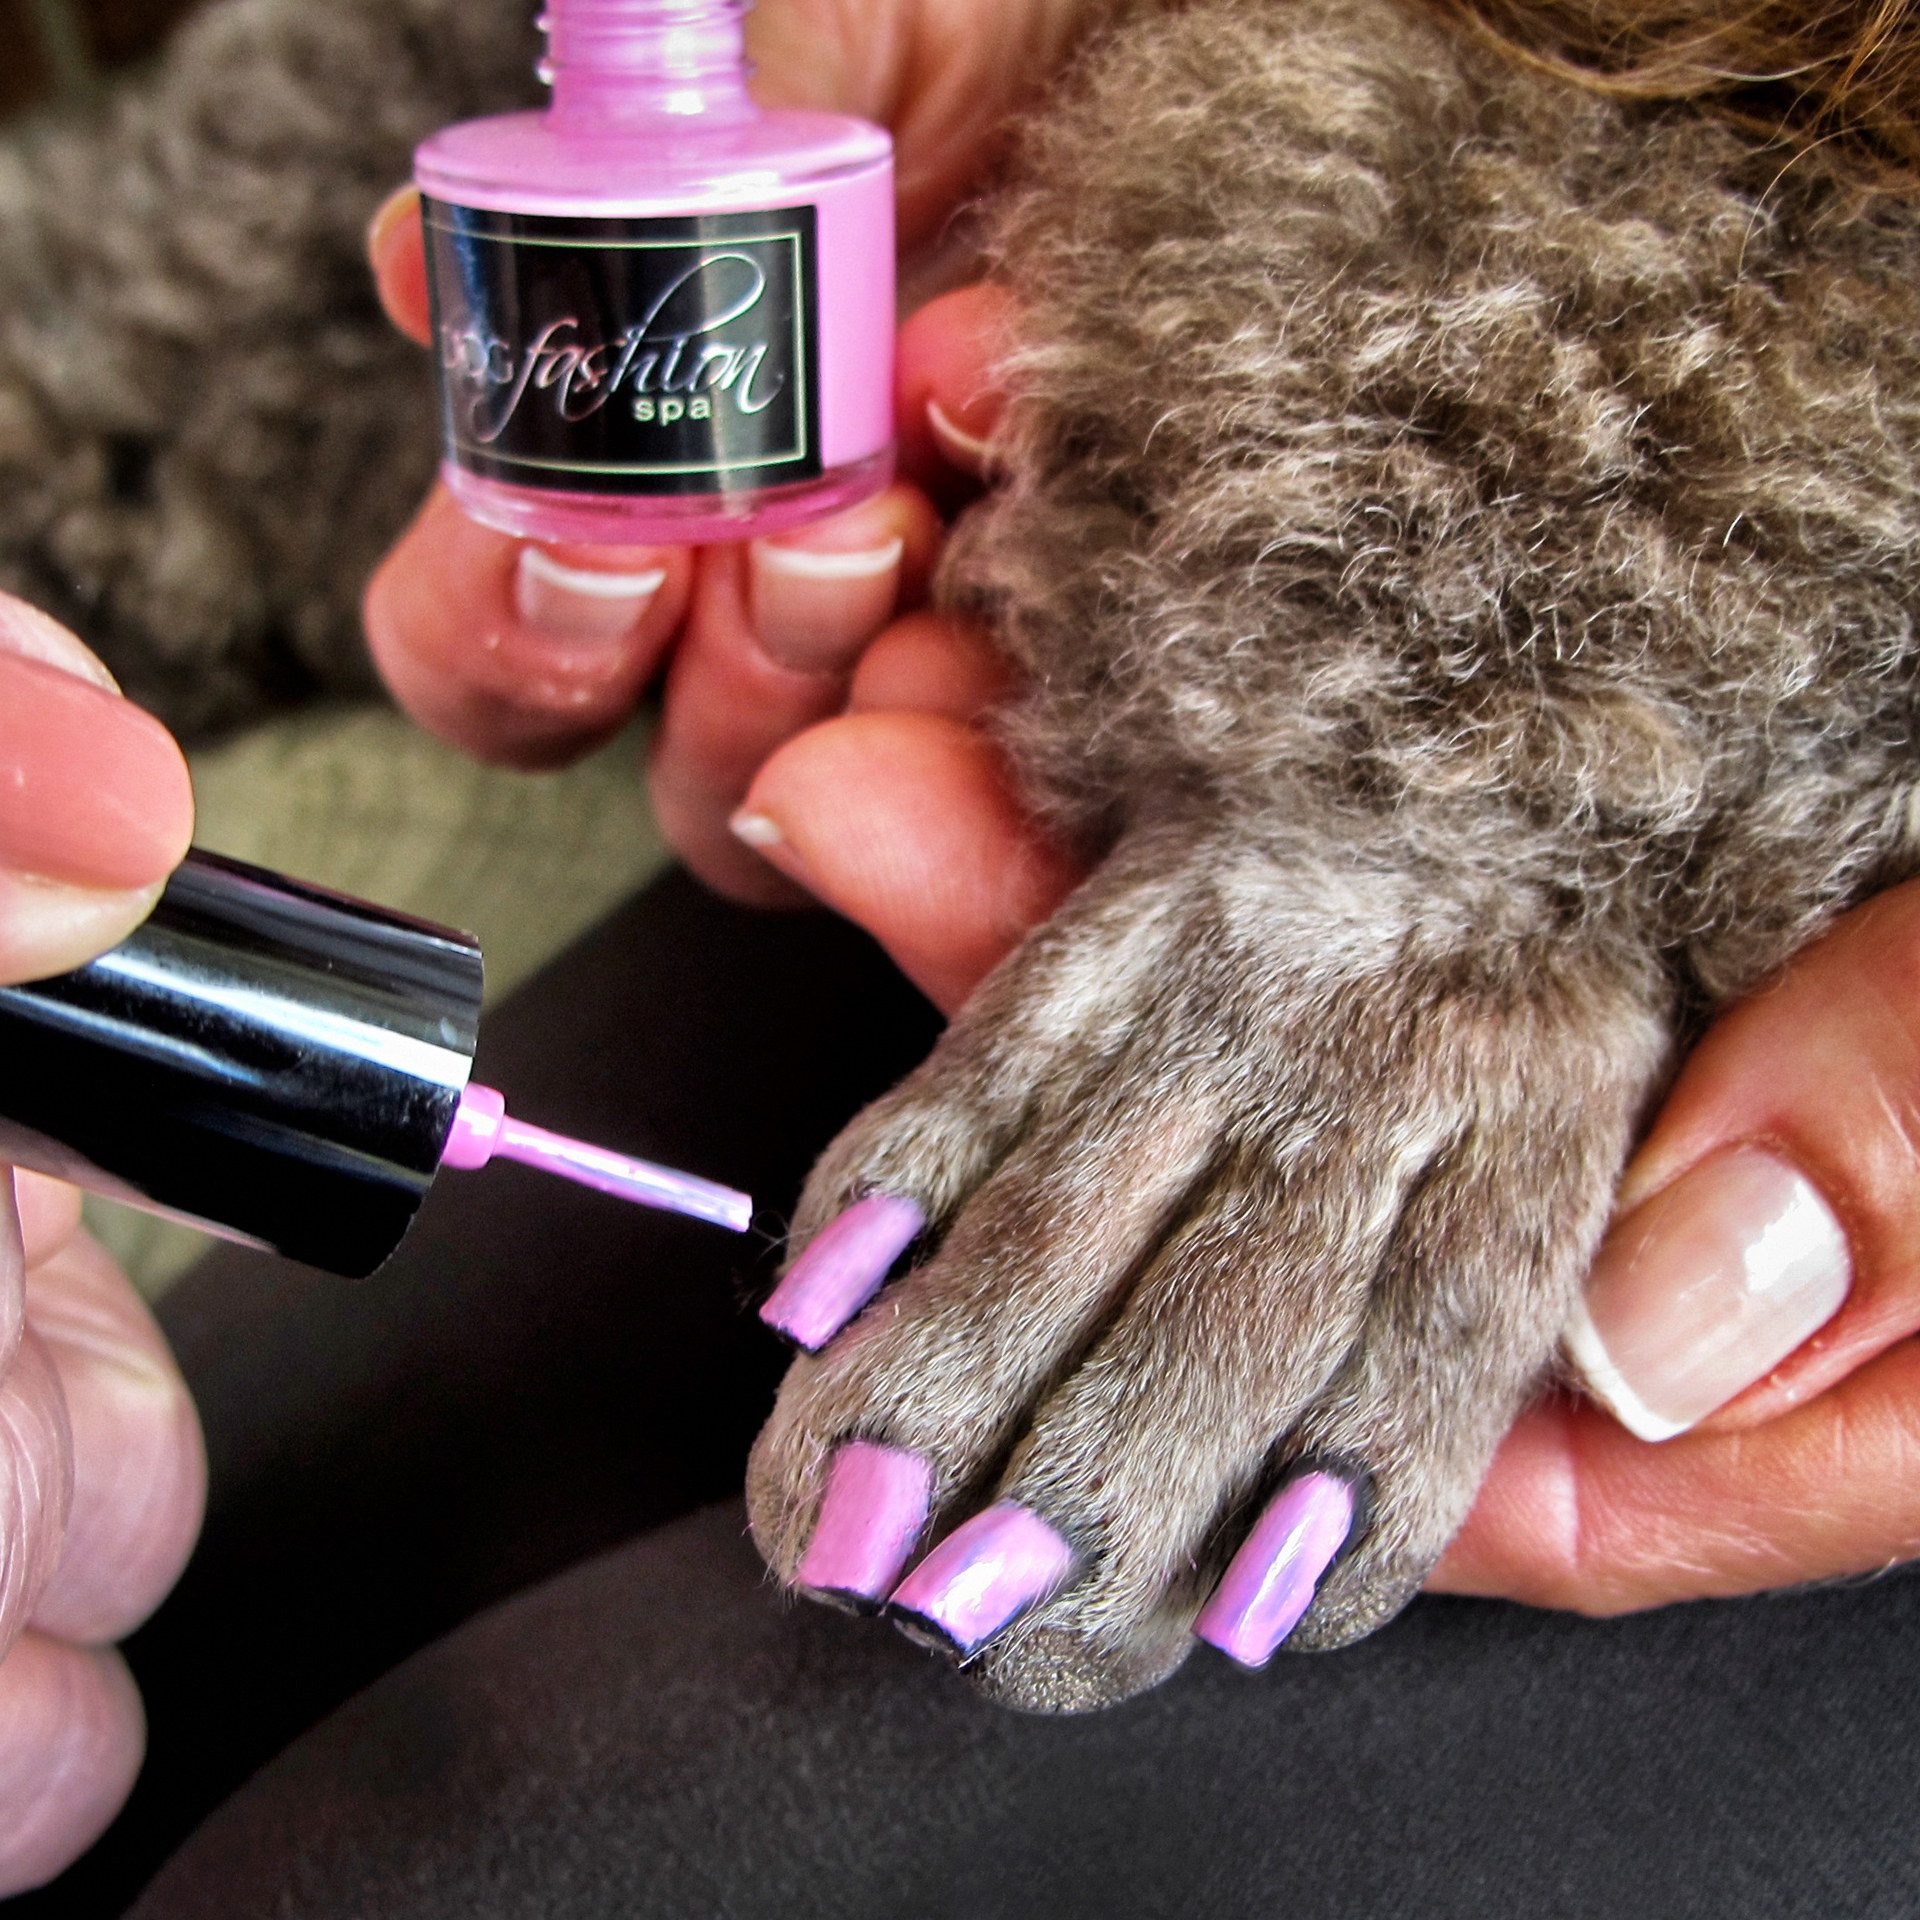 Just in Time for Halloween, Dog Fashion Spa Launches Non-toxic Nail